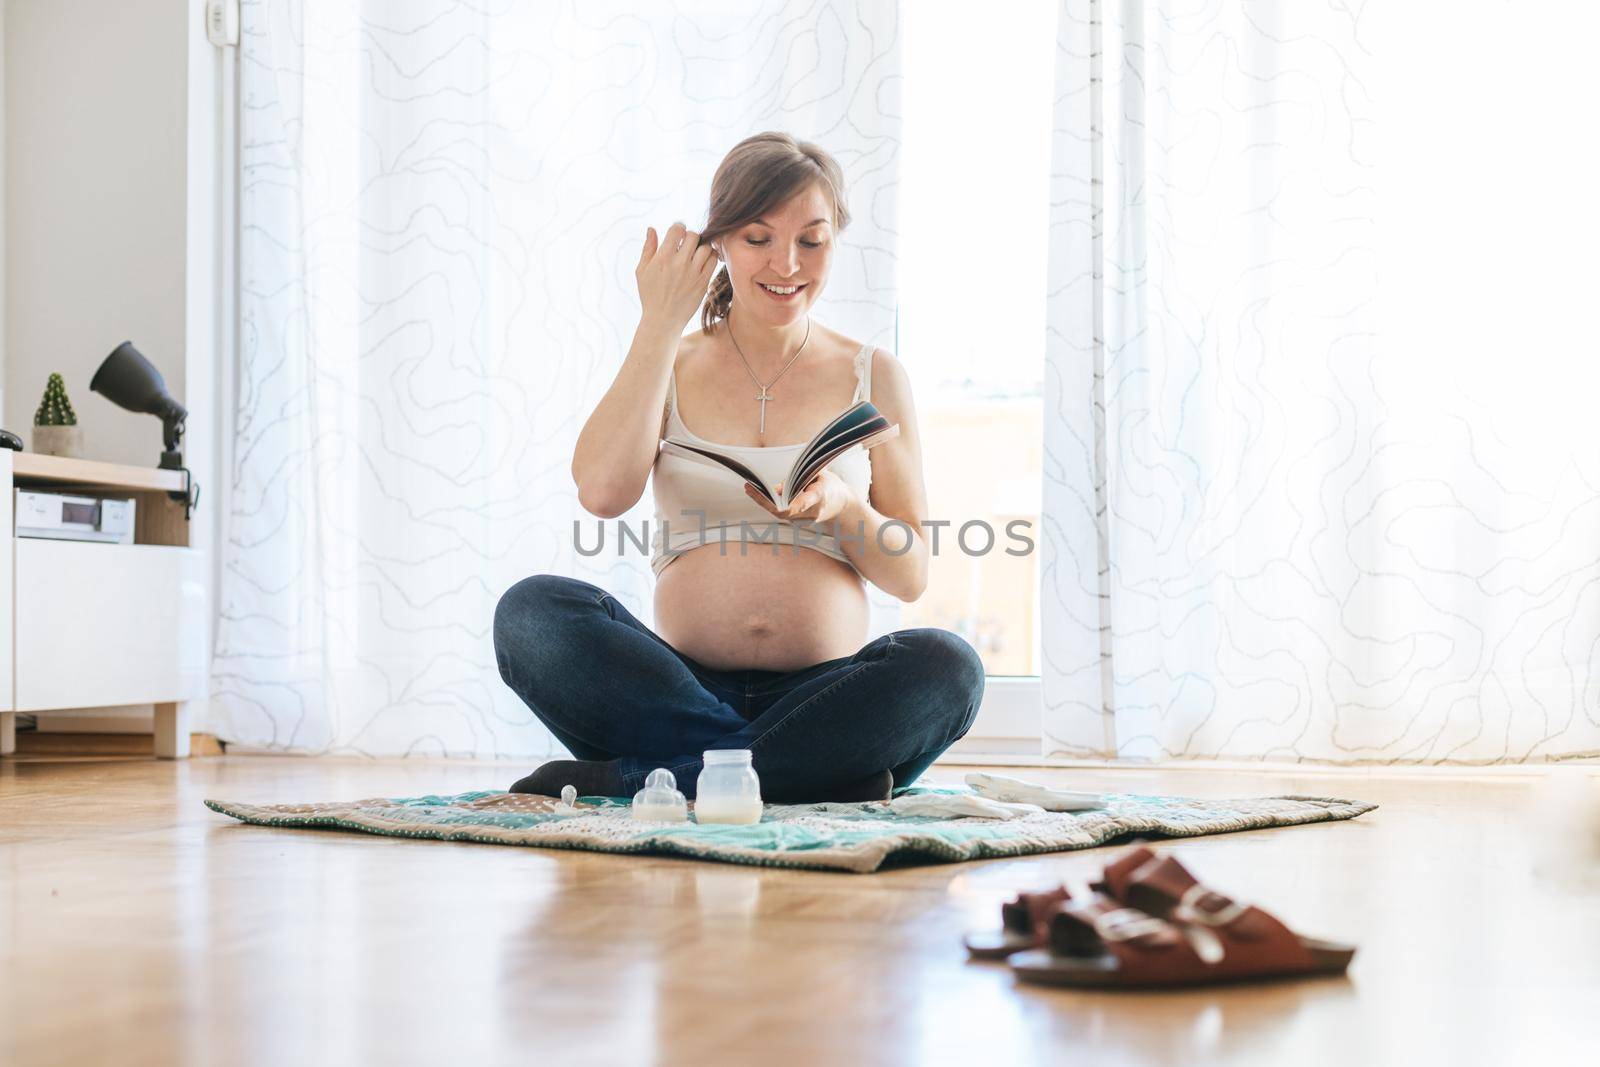 Reading about pregnancy: Happy pregnant mother is sitting on the floor, reading a book by Daxenbichler